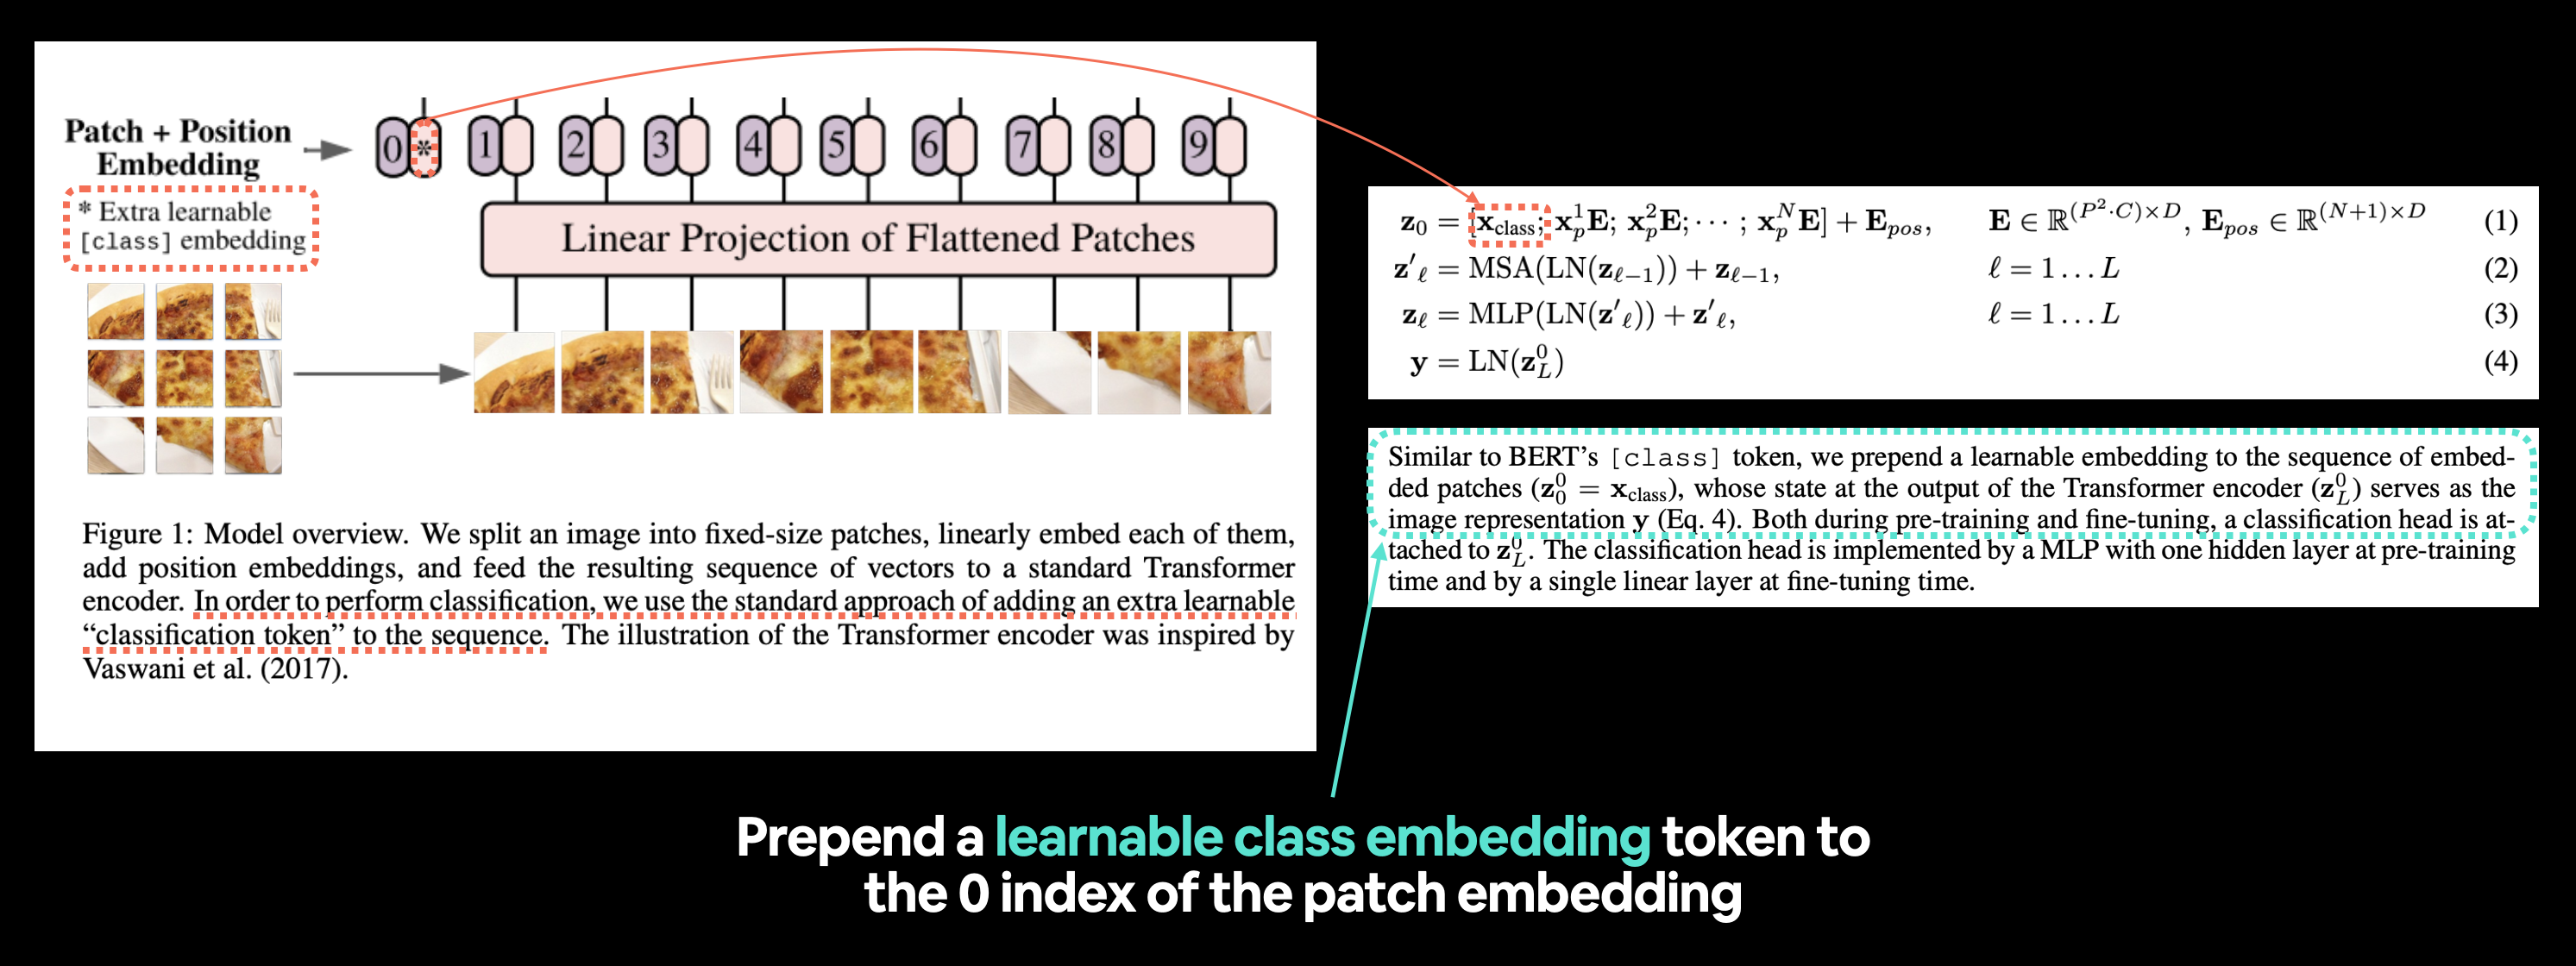 class token embedding highlight from the vision transformer paper figure 1 and section 3.1